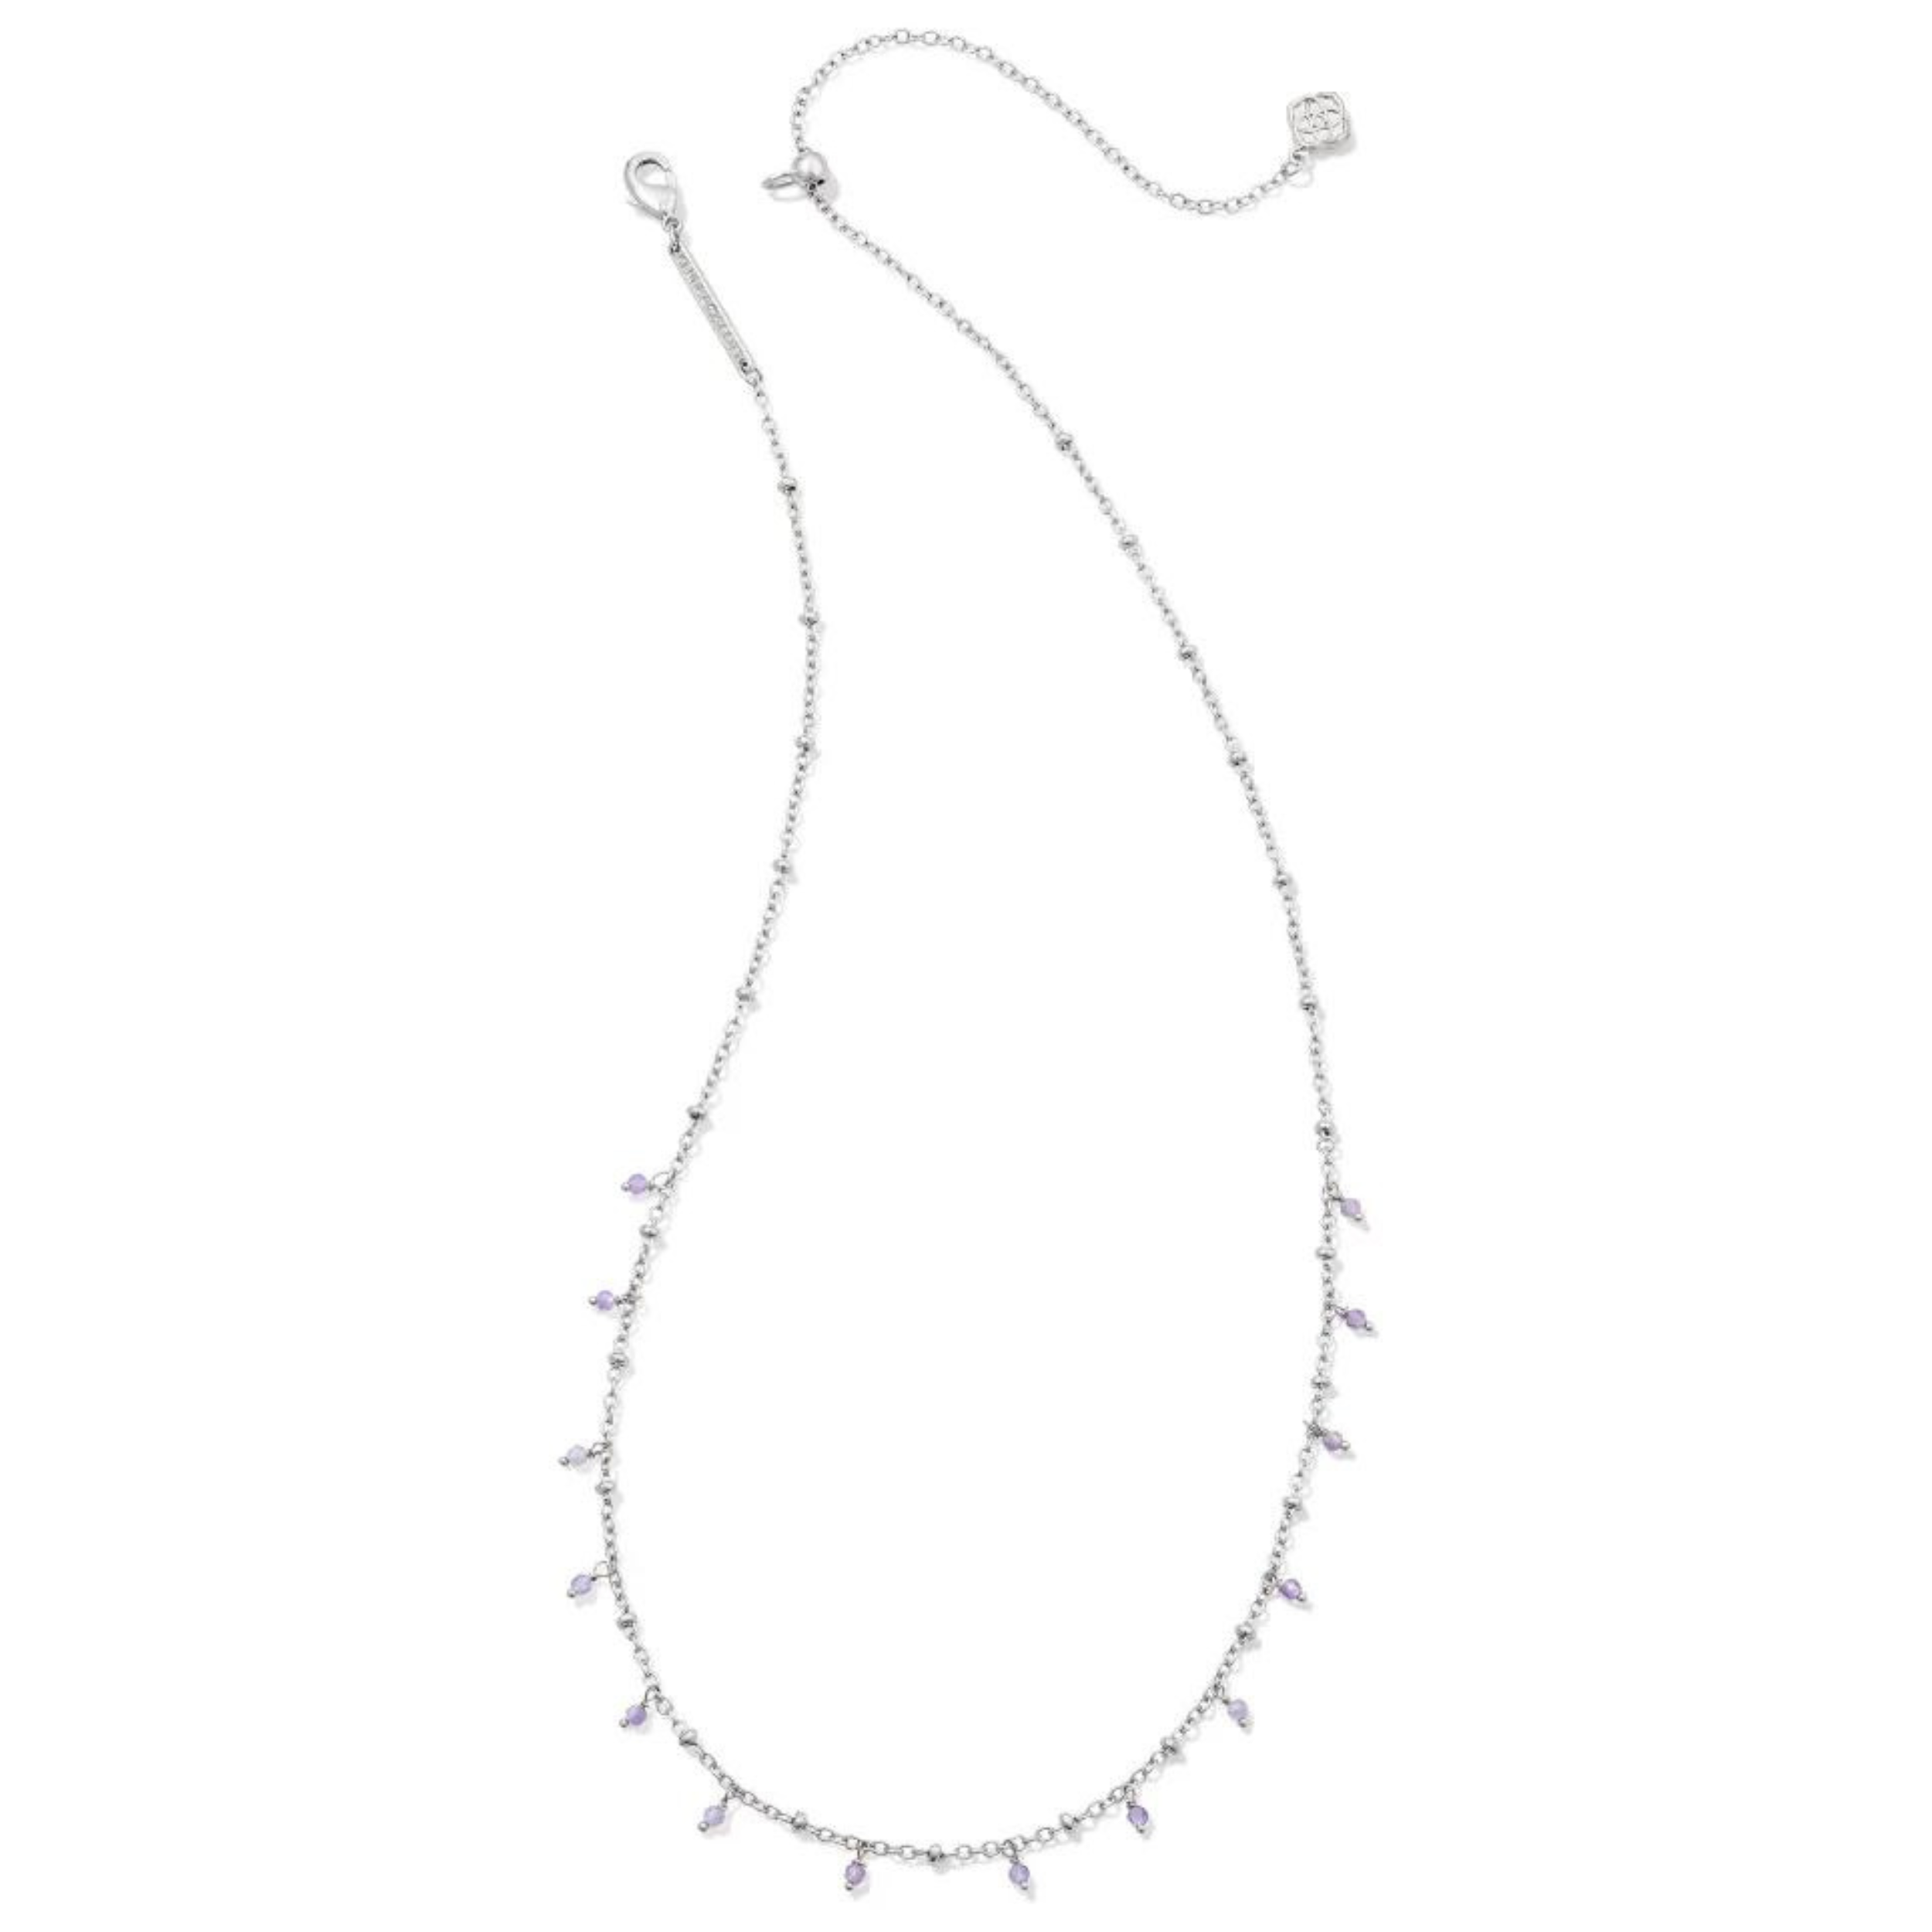 Silver necklace with amethyst beads, pictured on a white background.